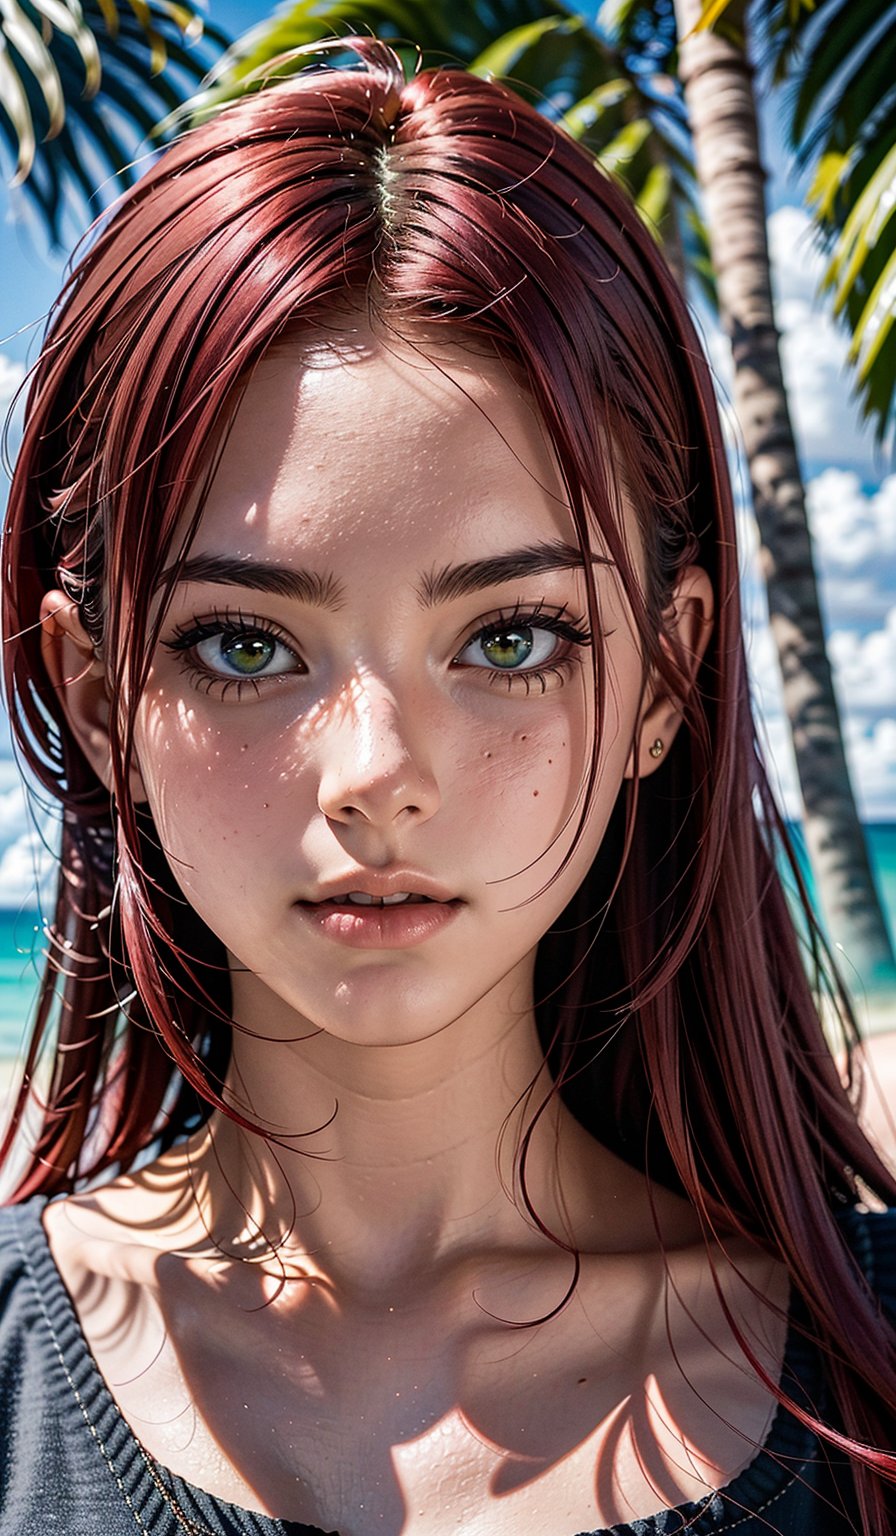 A beautiful girl, with red hair, a beautiful face. against the background of green palm trees, near the sea